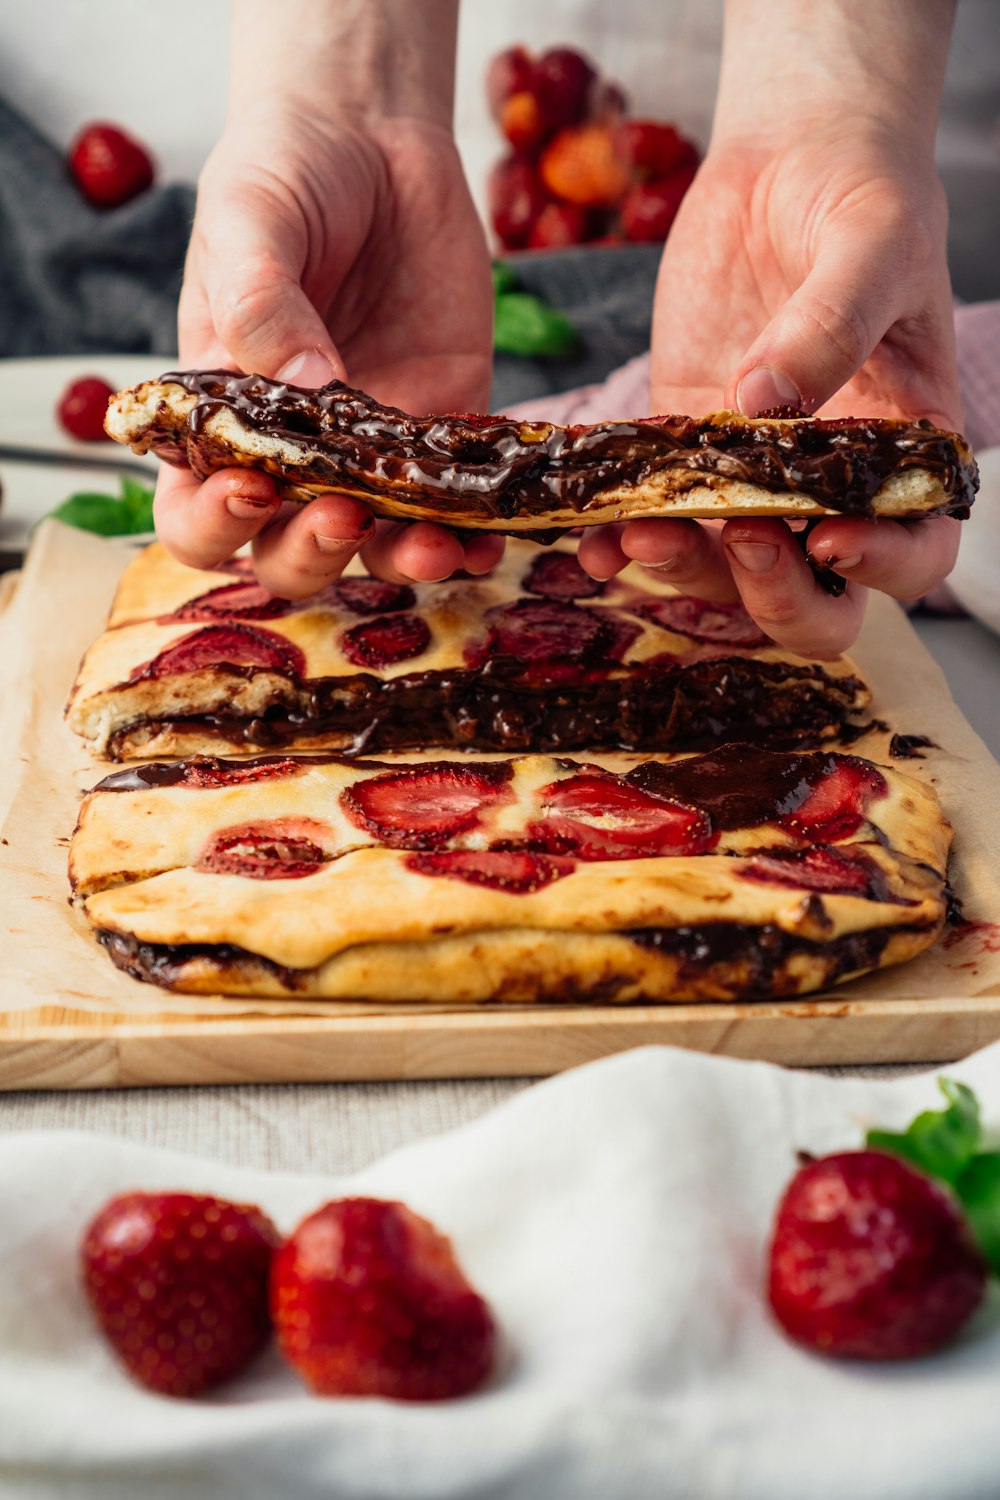 a person holding a pastry with chocolate and strawberries on it